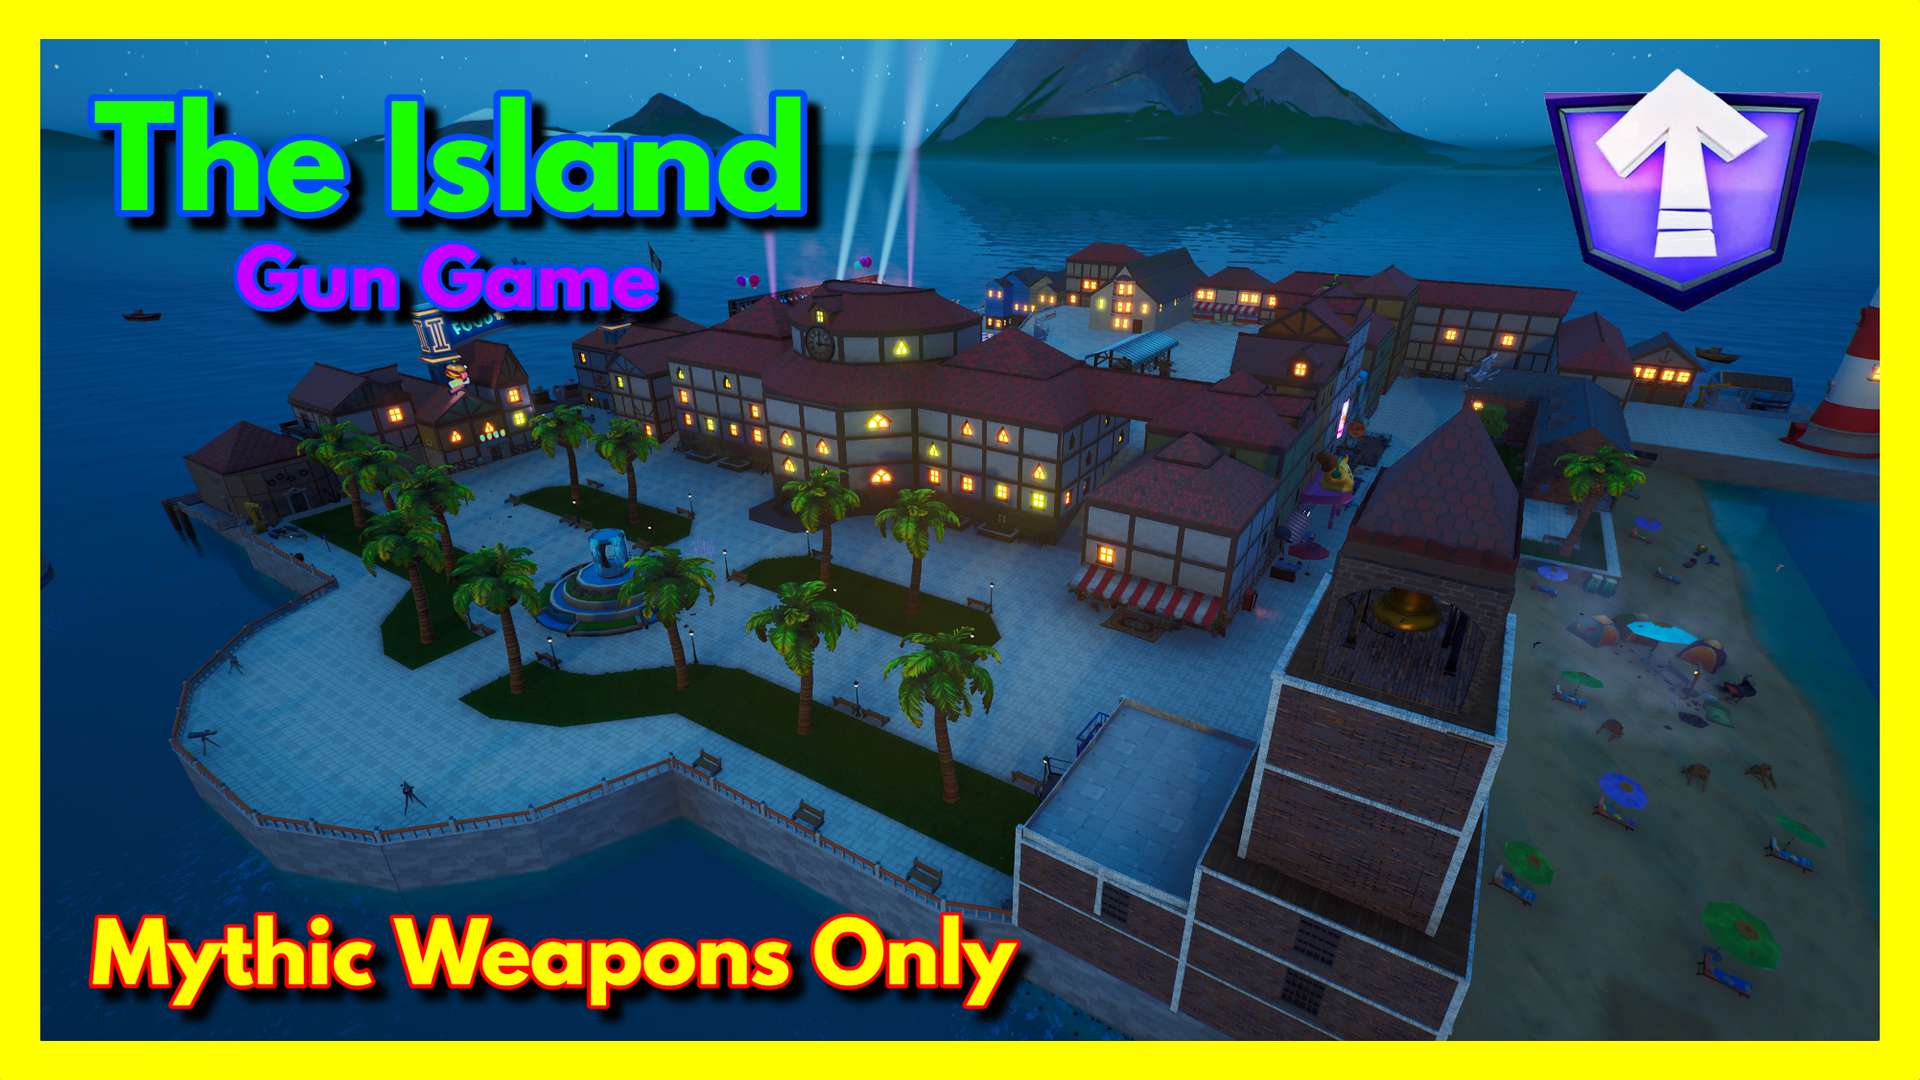 THE ISLAND | GUN GAME | MYTHIC WEAPONS